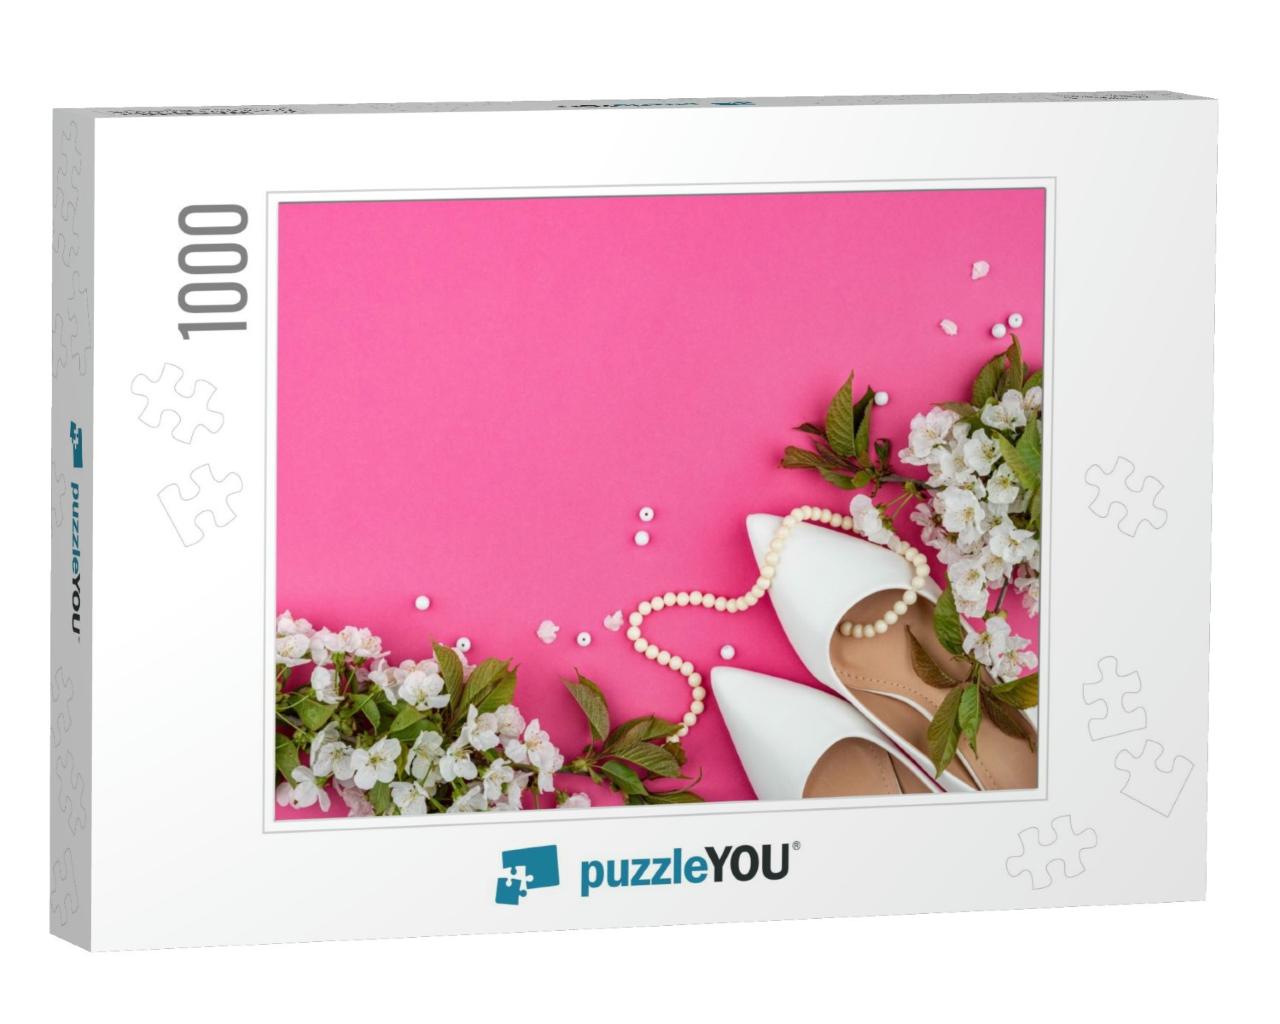 White Women's Shoes Among the Cherry Blossoms. Rom... Jigsaw Puzzle with 1000 pieces